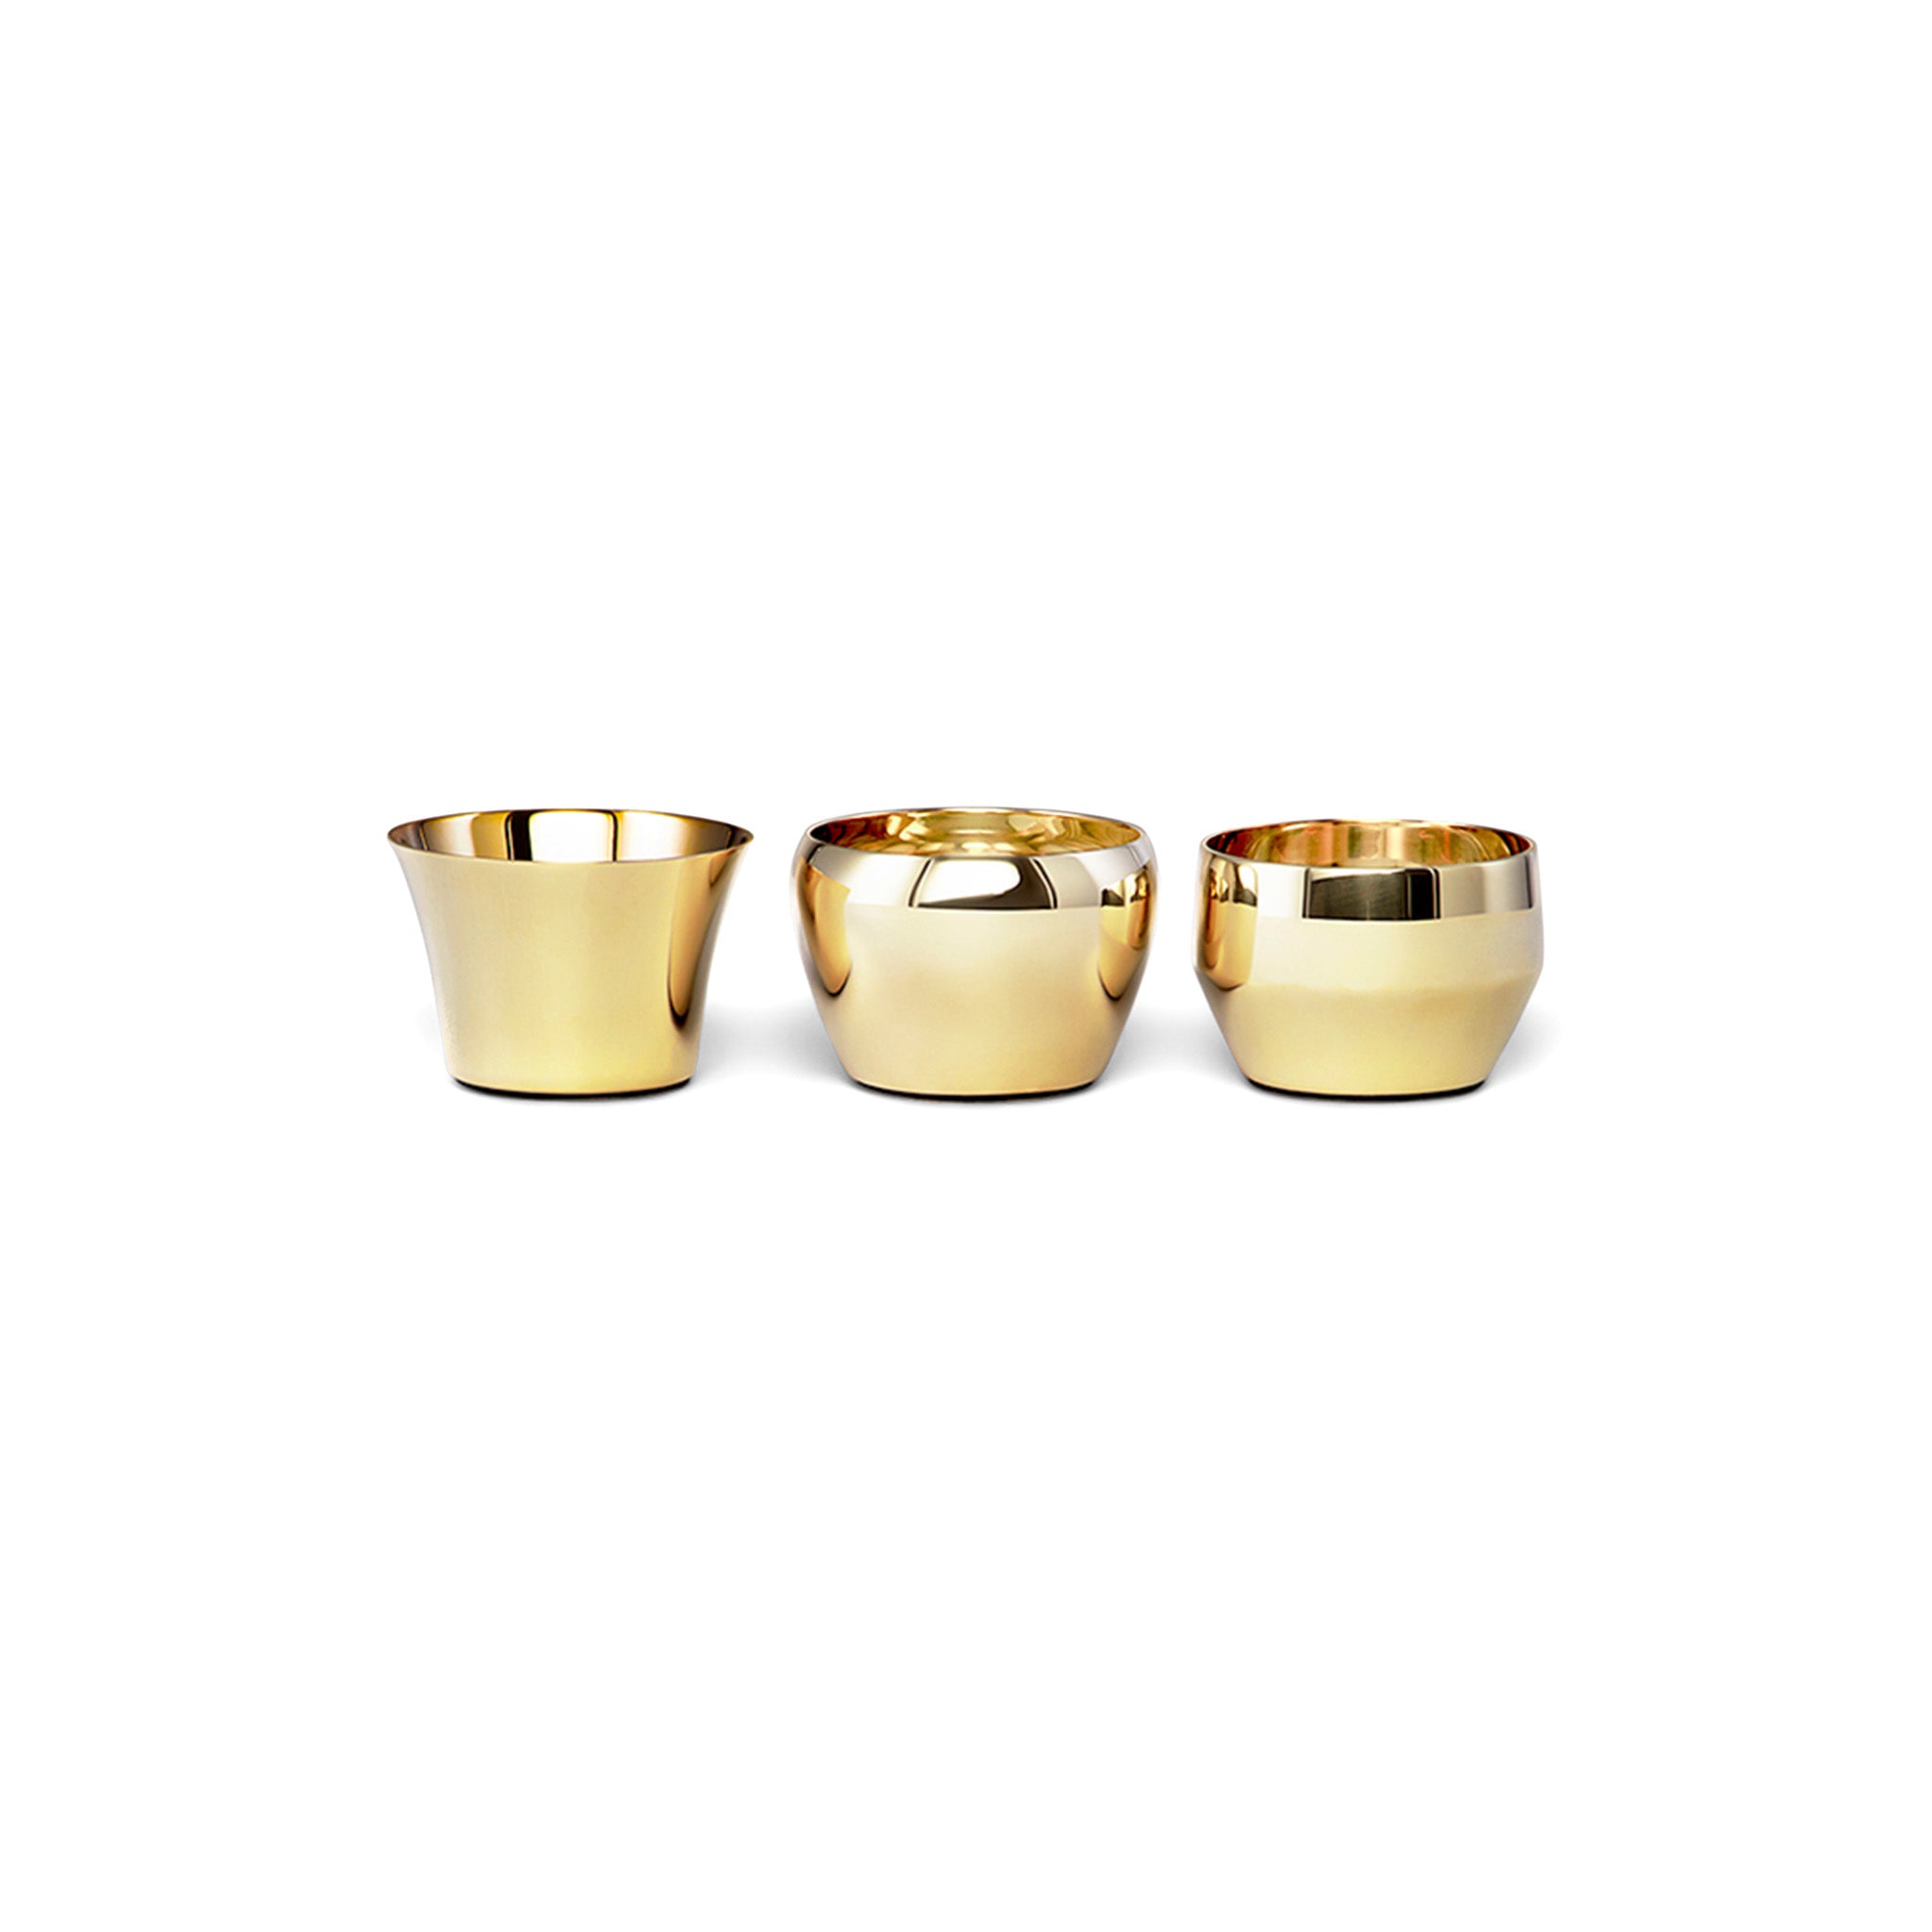 three brass tealights by skultuna sitting next to each other in a side view